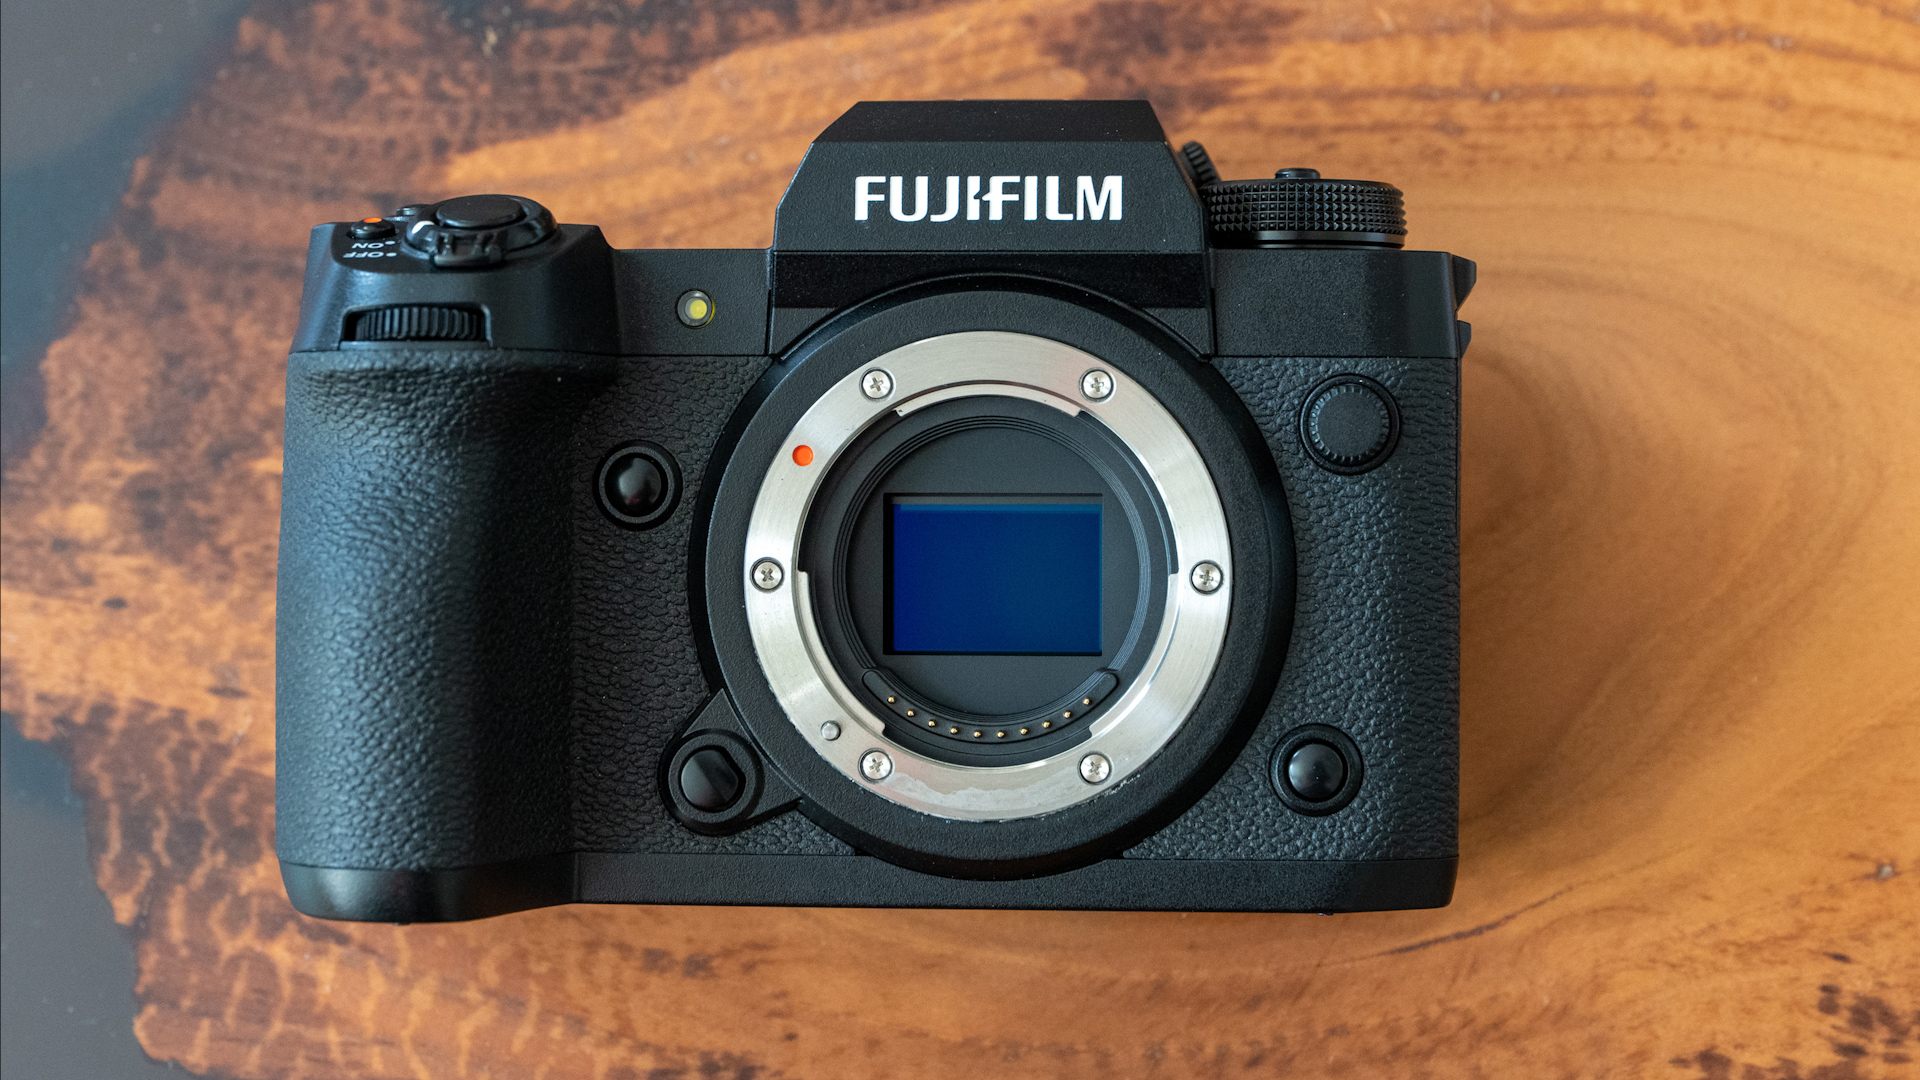 FUJIFILM X-H2 Review - Are We Looking at the APS-C Mirrorless